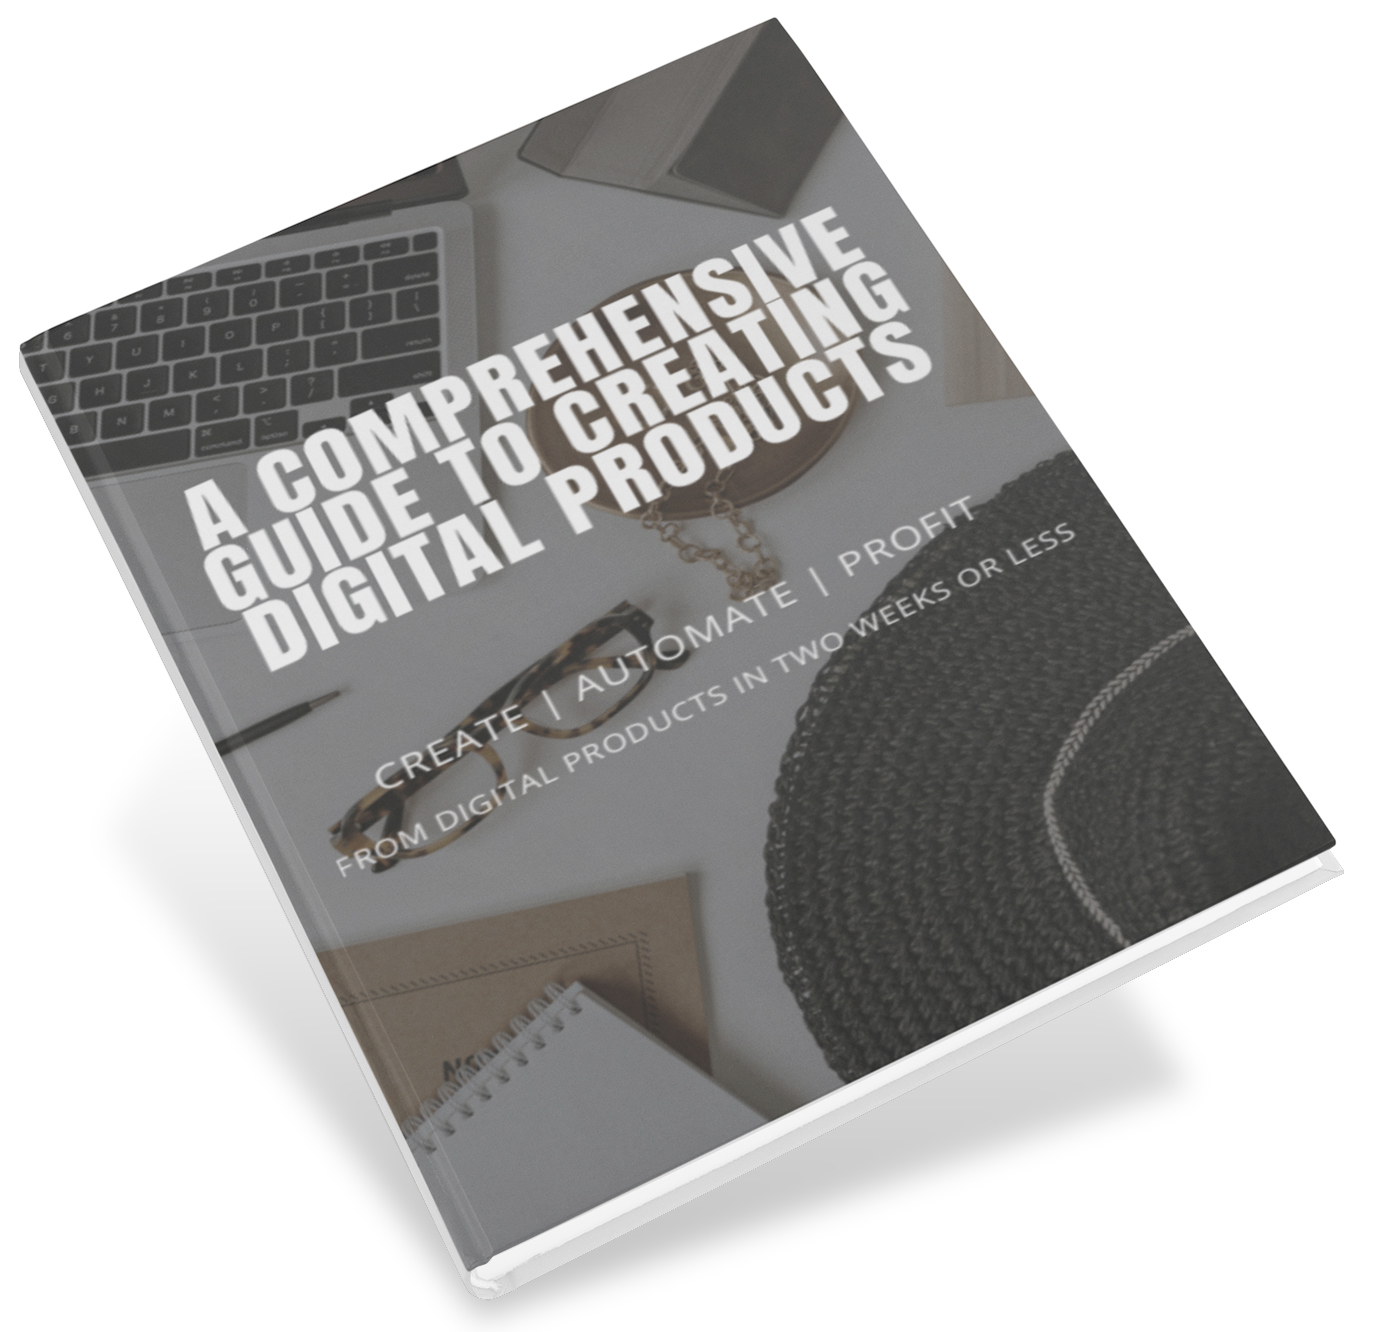 A Comprehensive Guide to Creating Digital Products EBook Cover